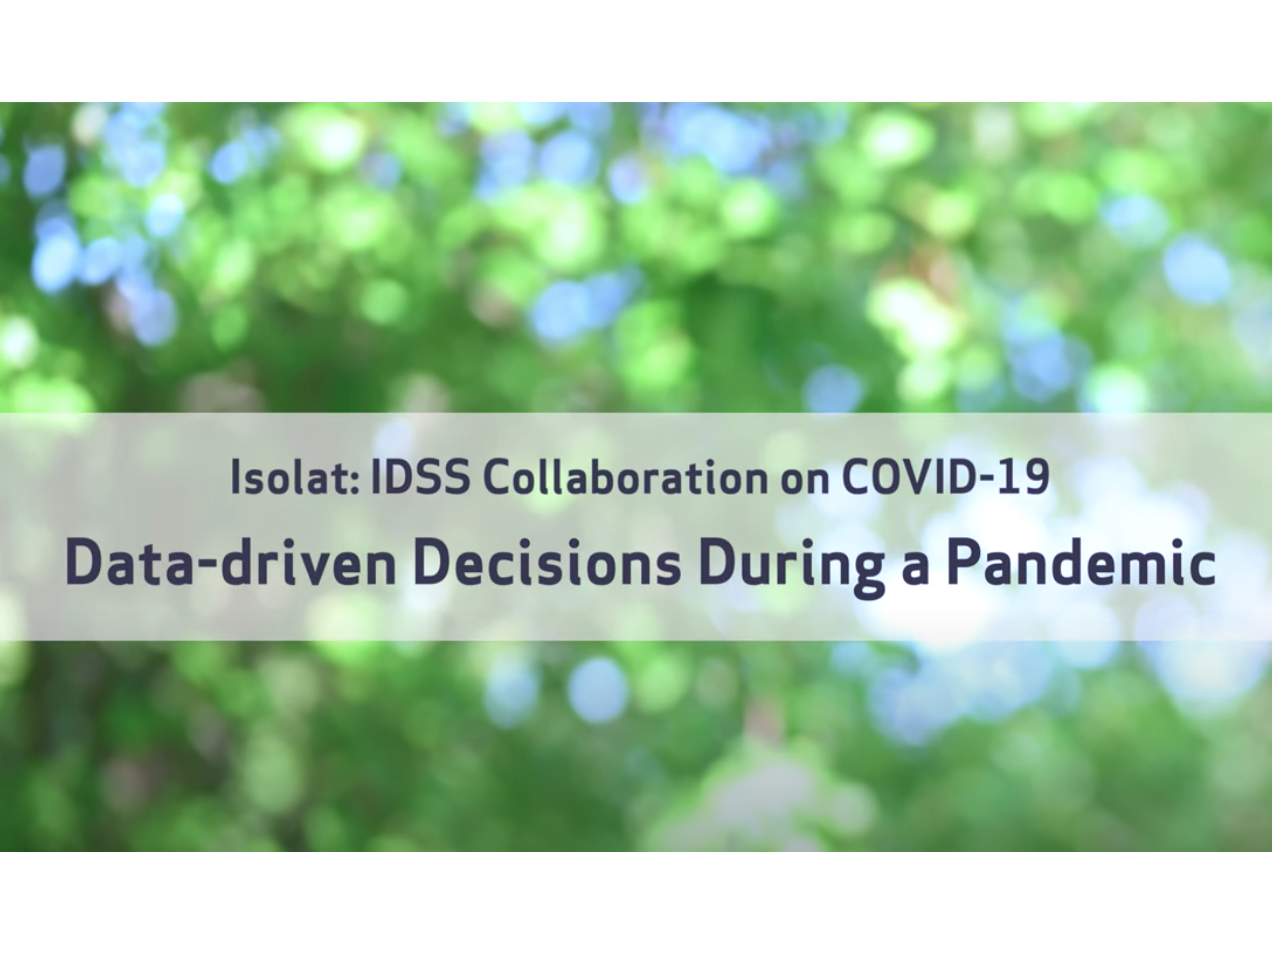 Isolat: Data-Driven Decisions During a Pandemic